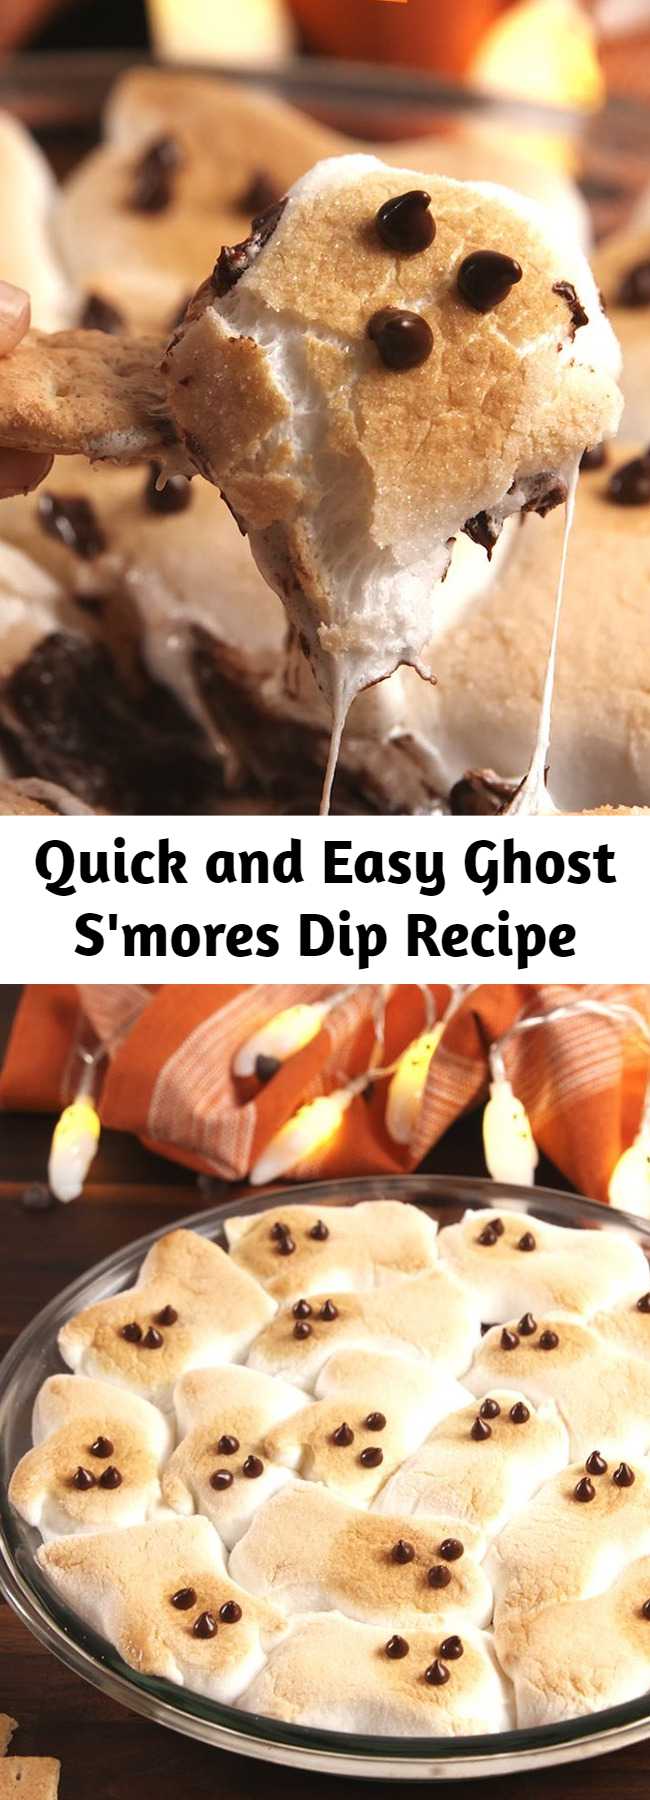 Quick and Easy Ghost S'mores Dip Recipe - A scary delicious Halloween dip that's easy to make whenever you need a quick treat.